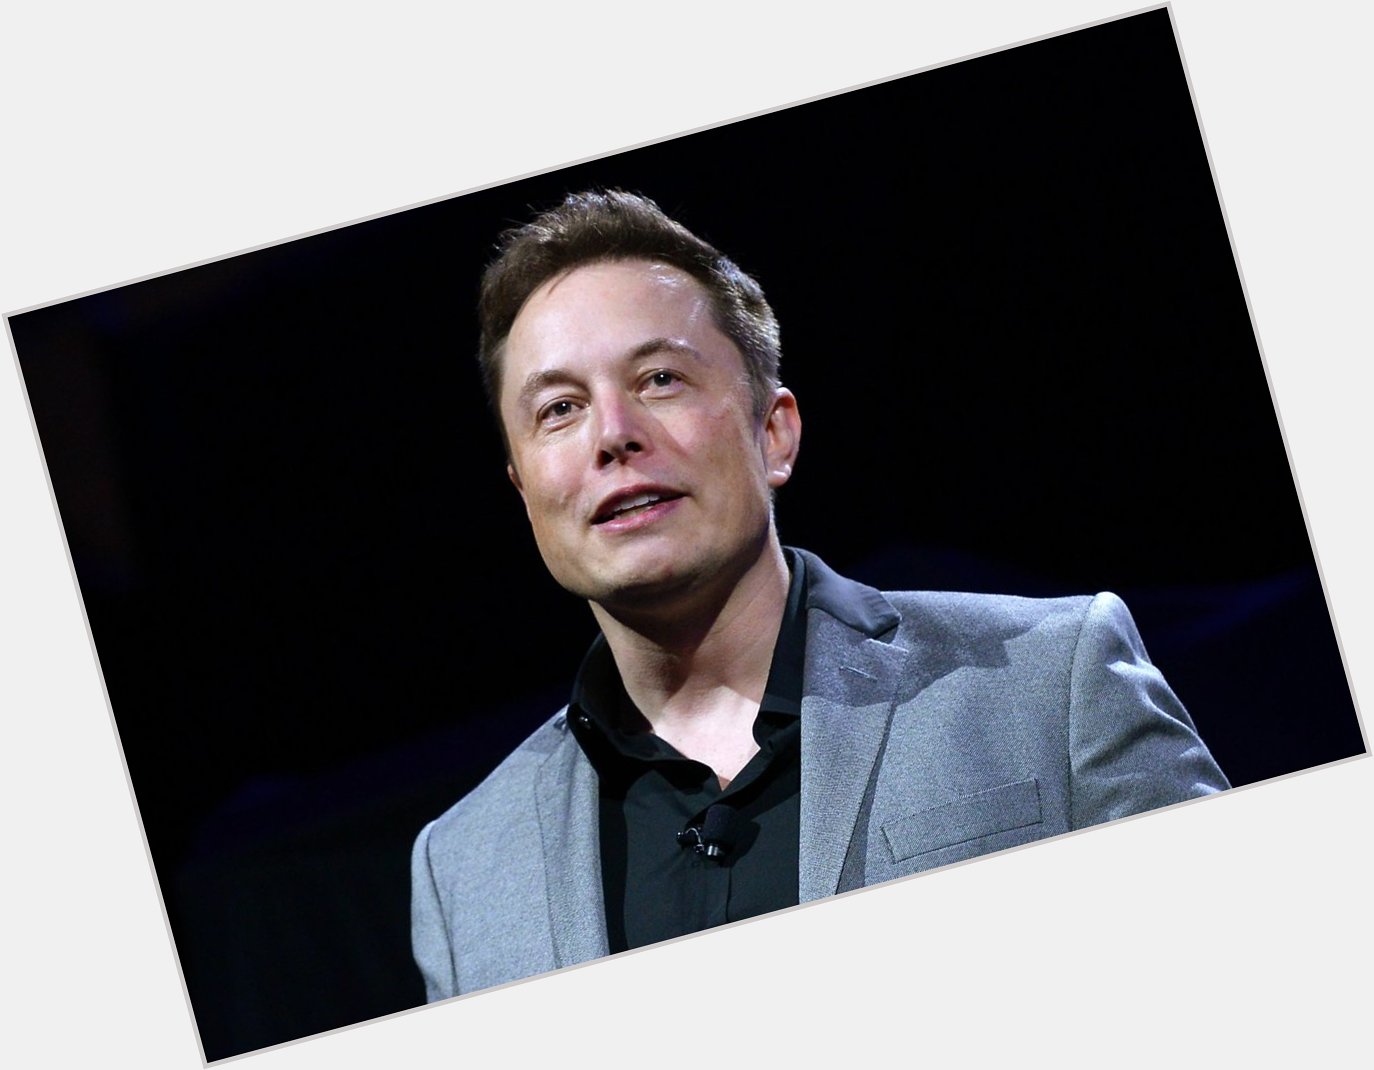 Happy Birthday to the Futuristic and Neoteric person on the Planet - Elon Musk   